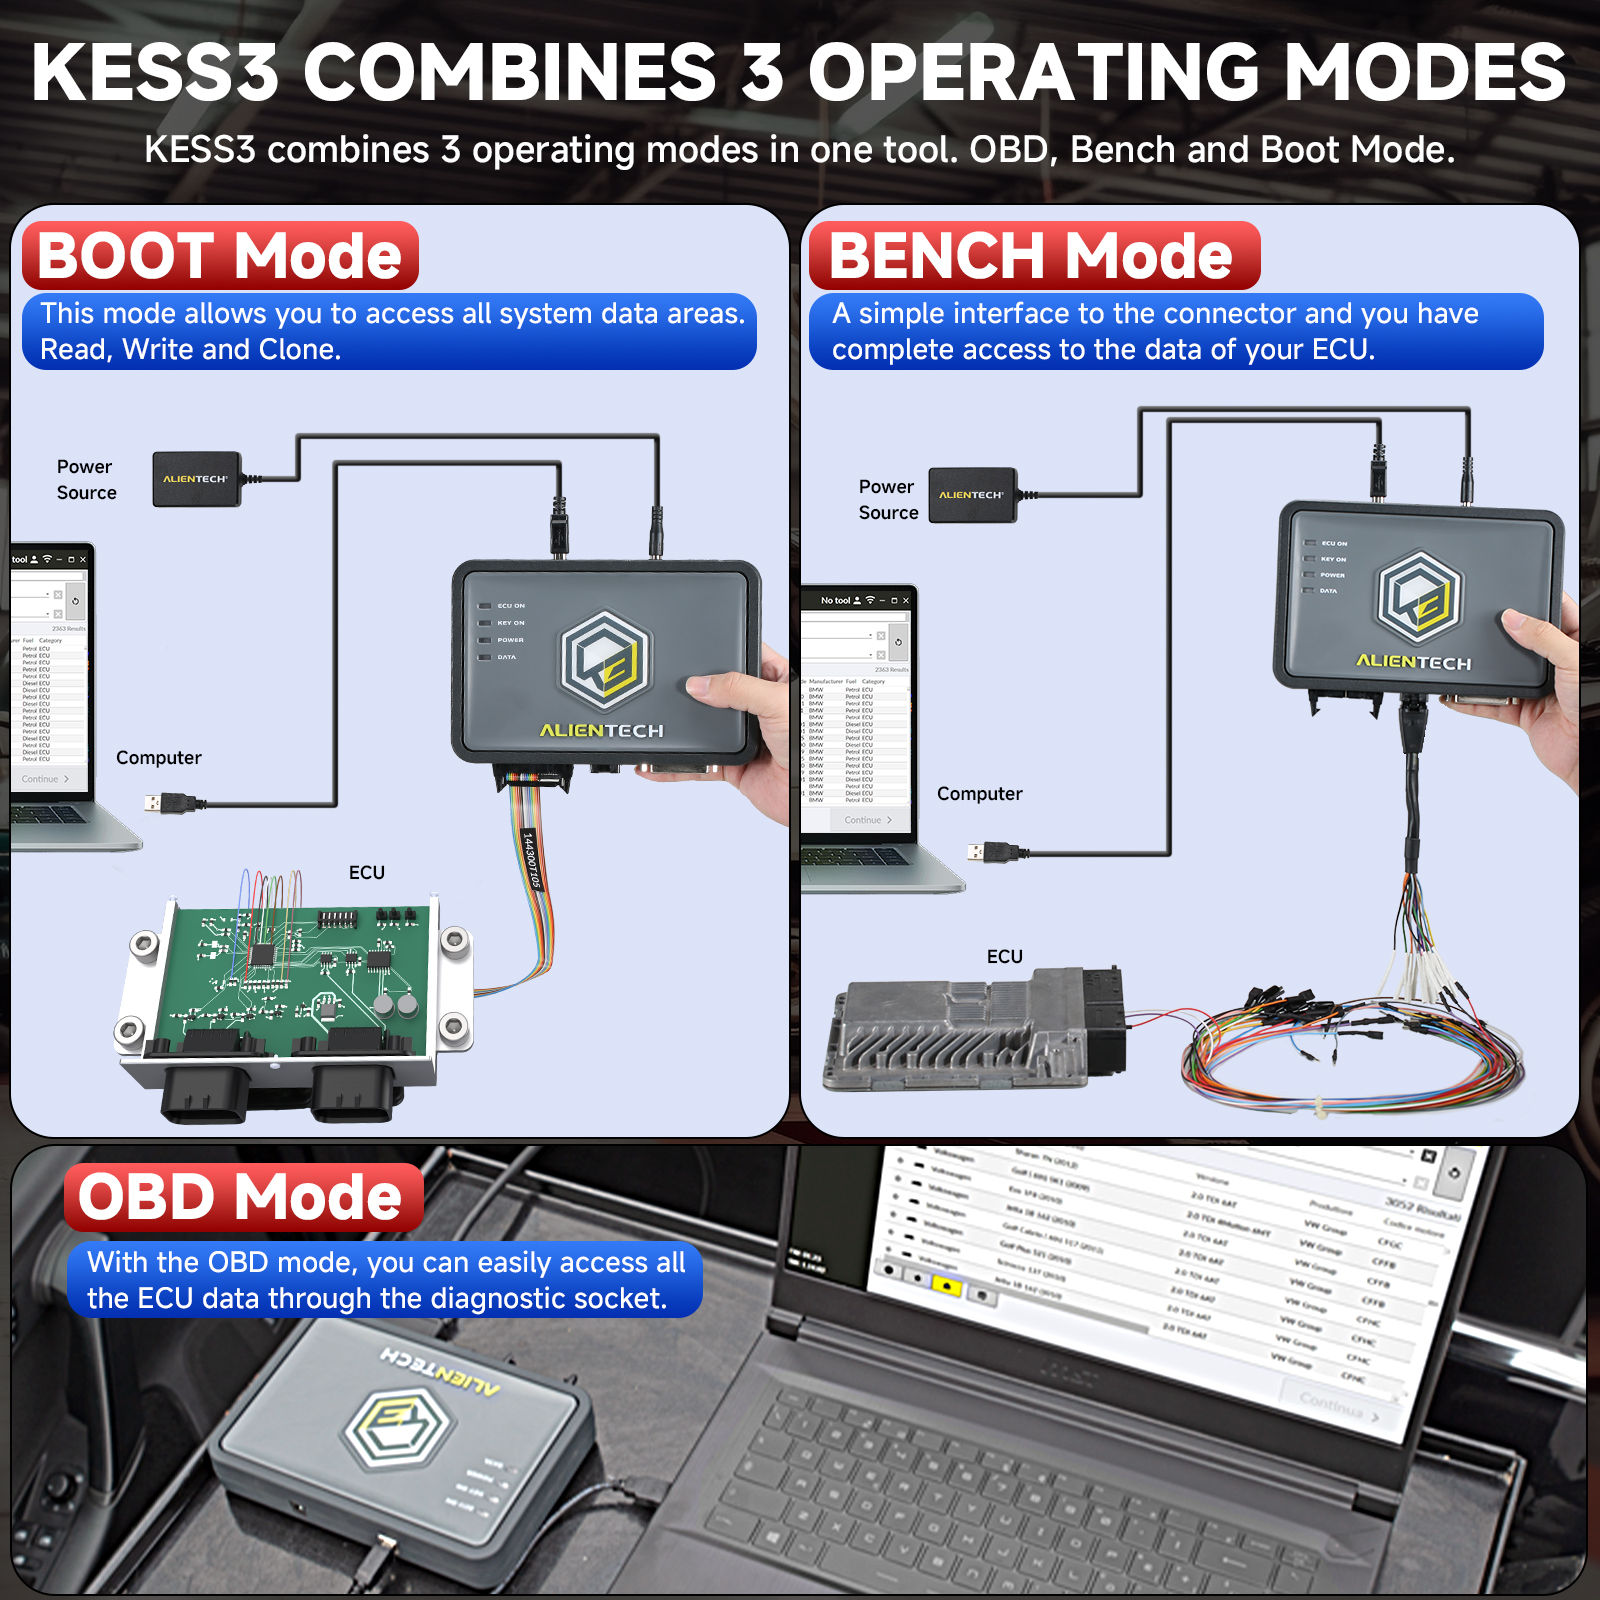 KESS3 combines 3 operating modes in one tool. OBD, Bench and Boot mode.